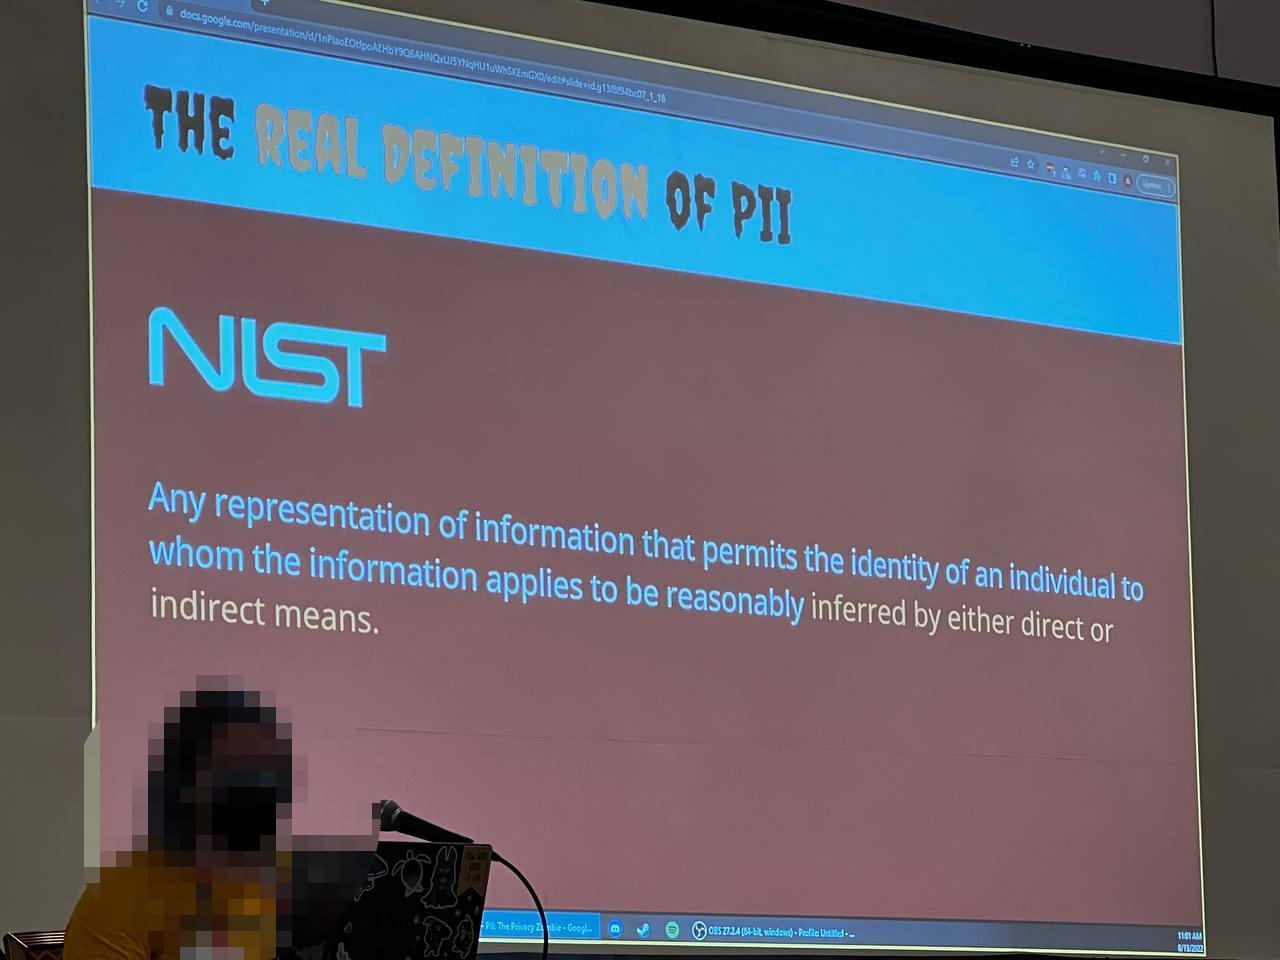 The real definition of PII from NIST: Any representation of information that permits the identity of the individual whom the information applies to to be reasonably inferred by either direct or indirect means.